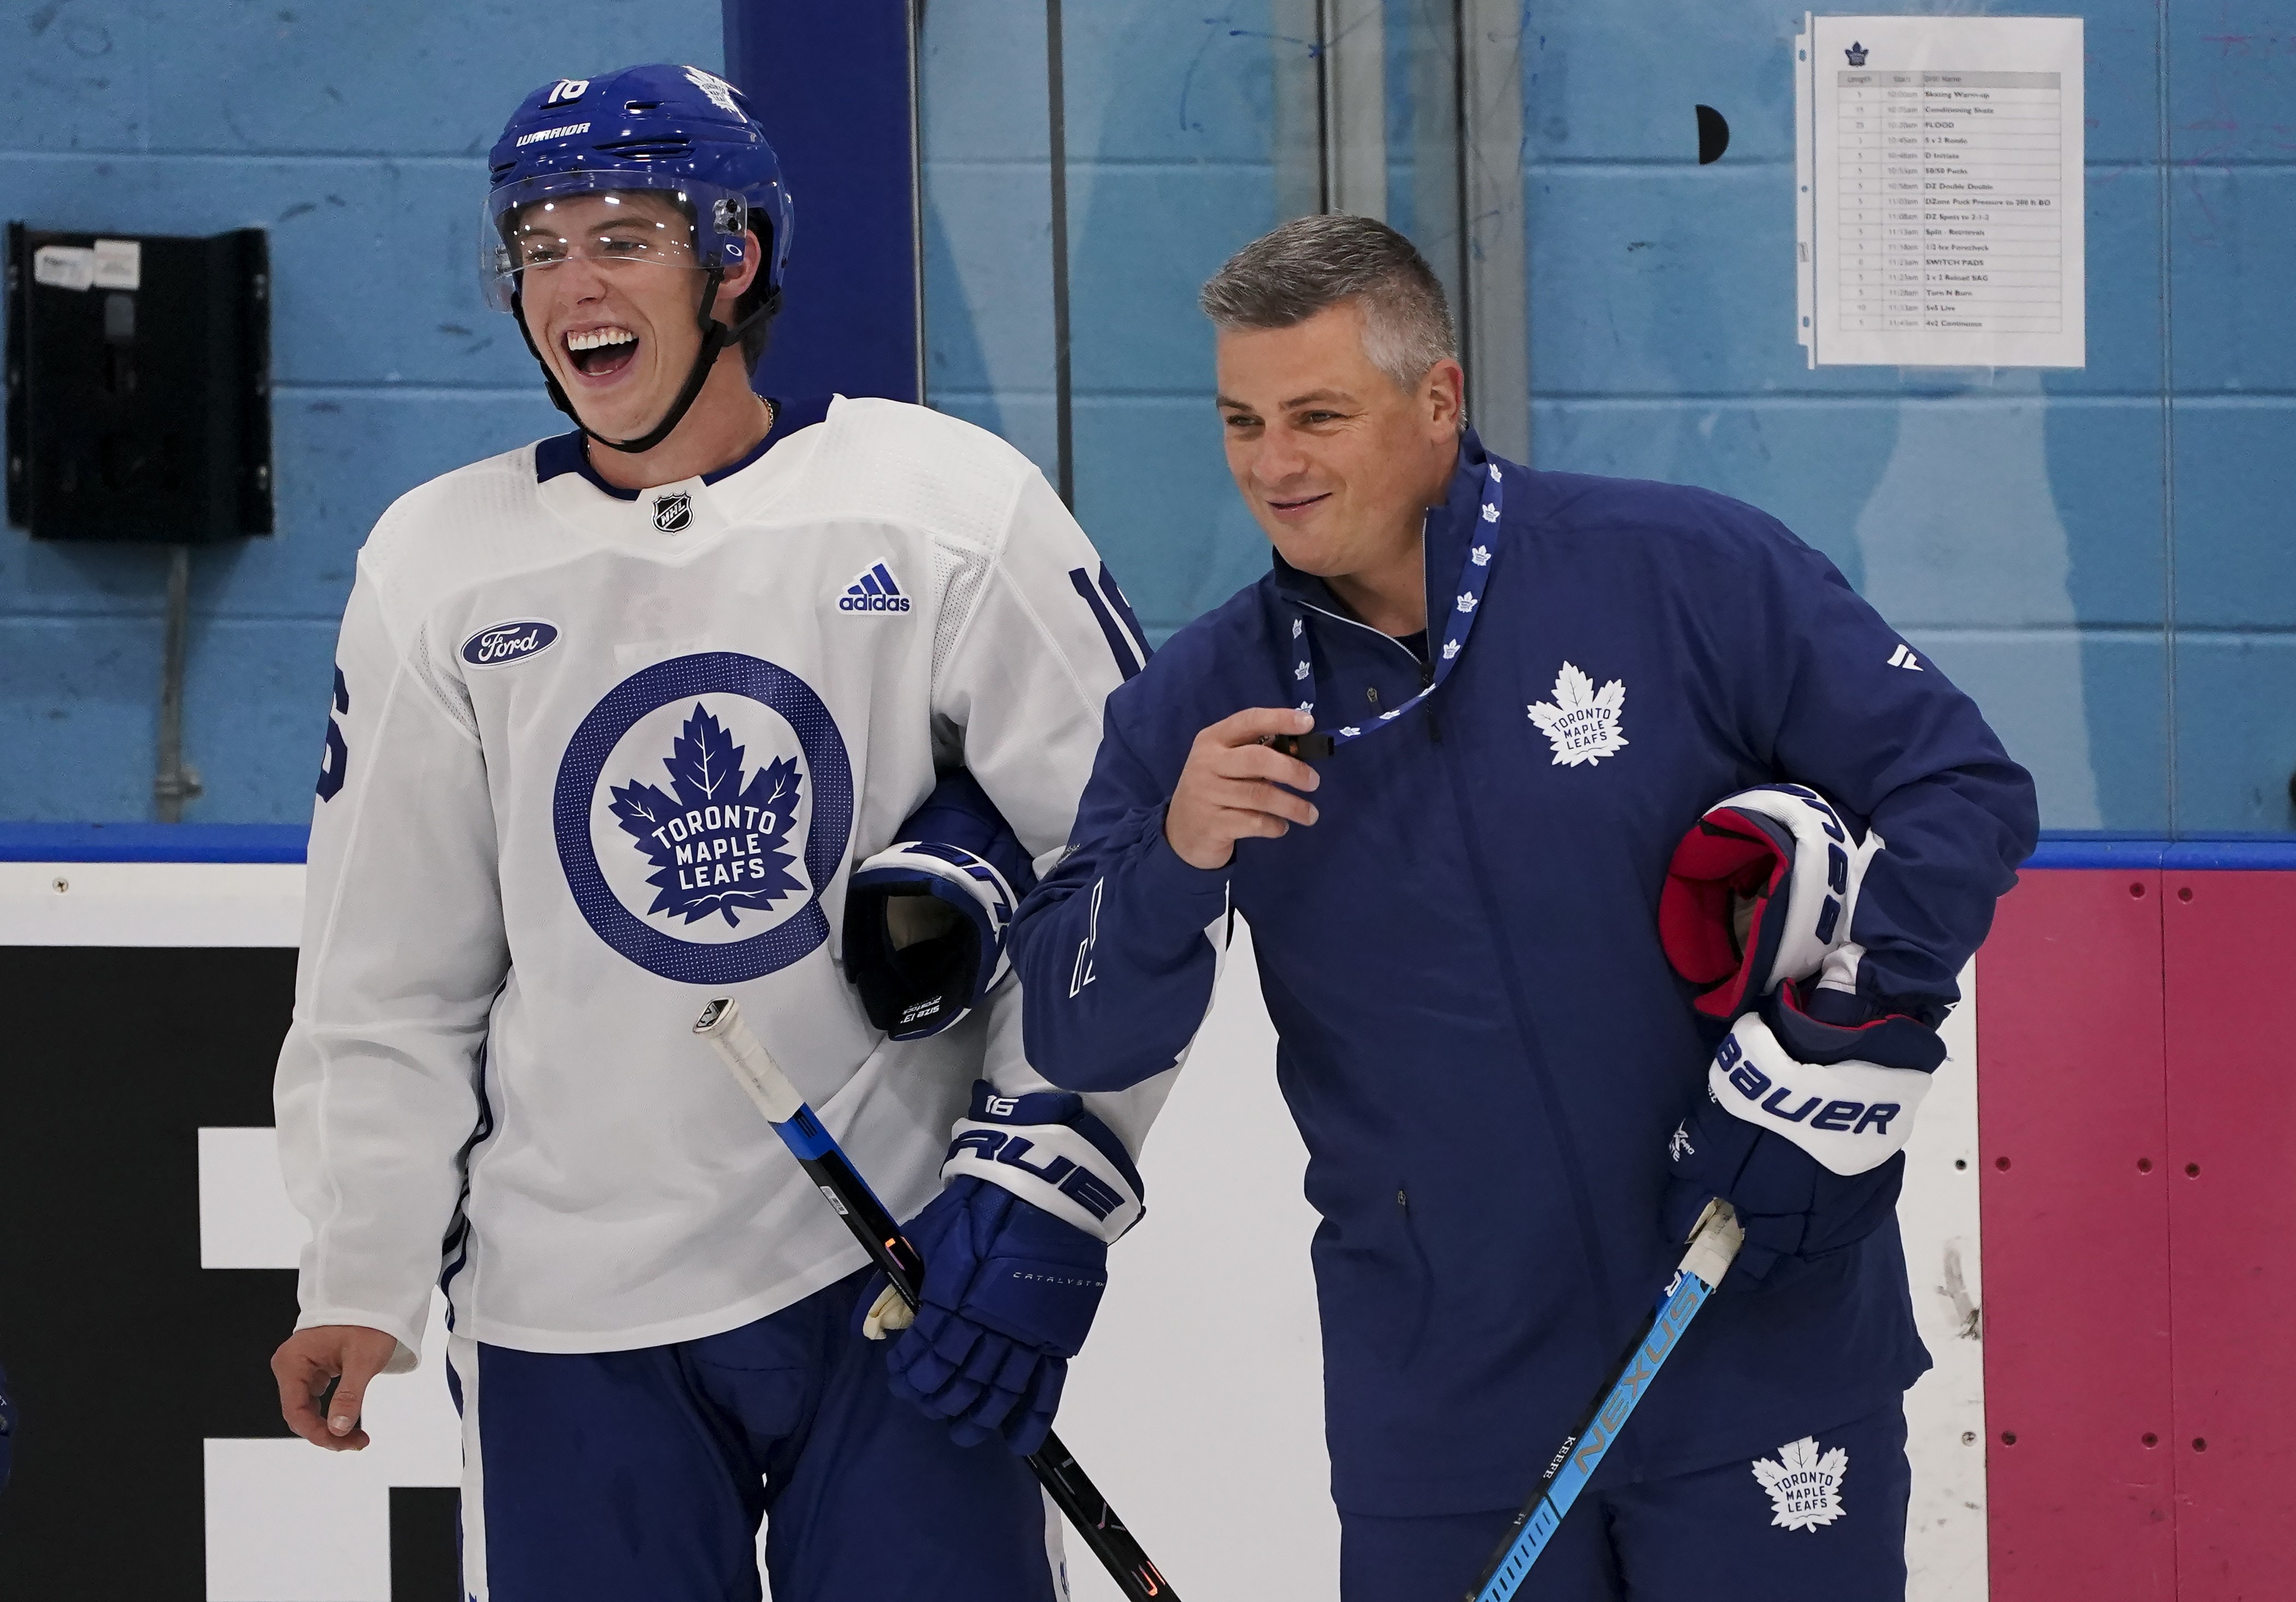 Maple Leafs will hit another gear when Mitch Marner (really) takes